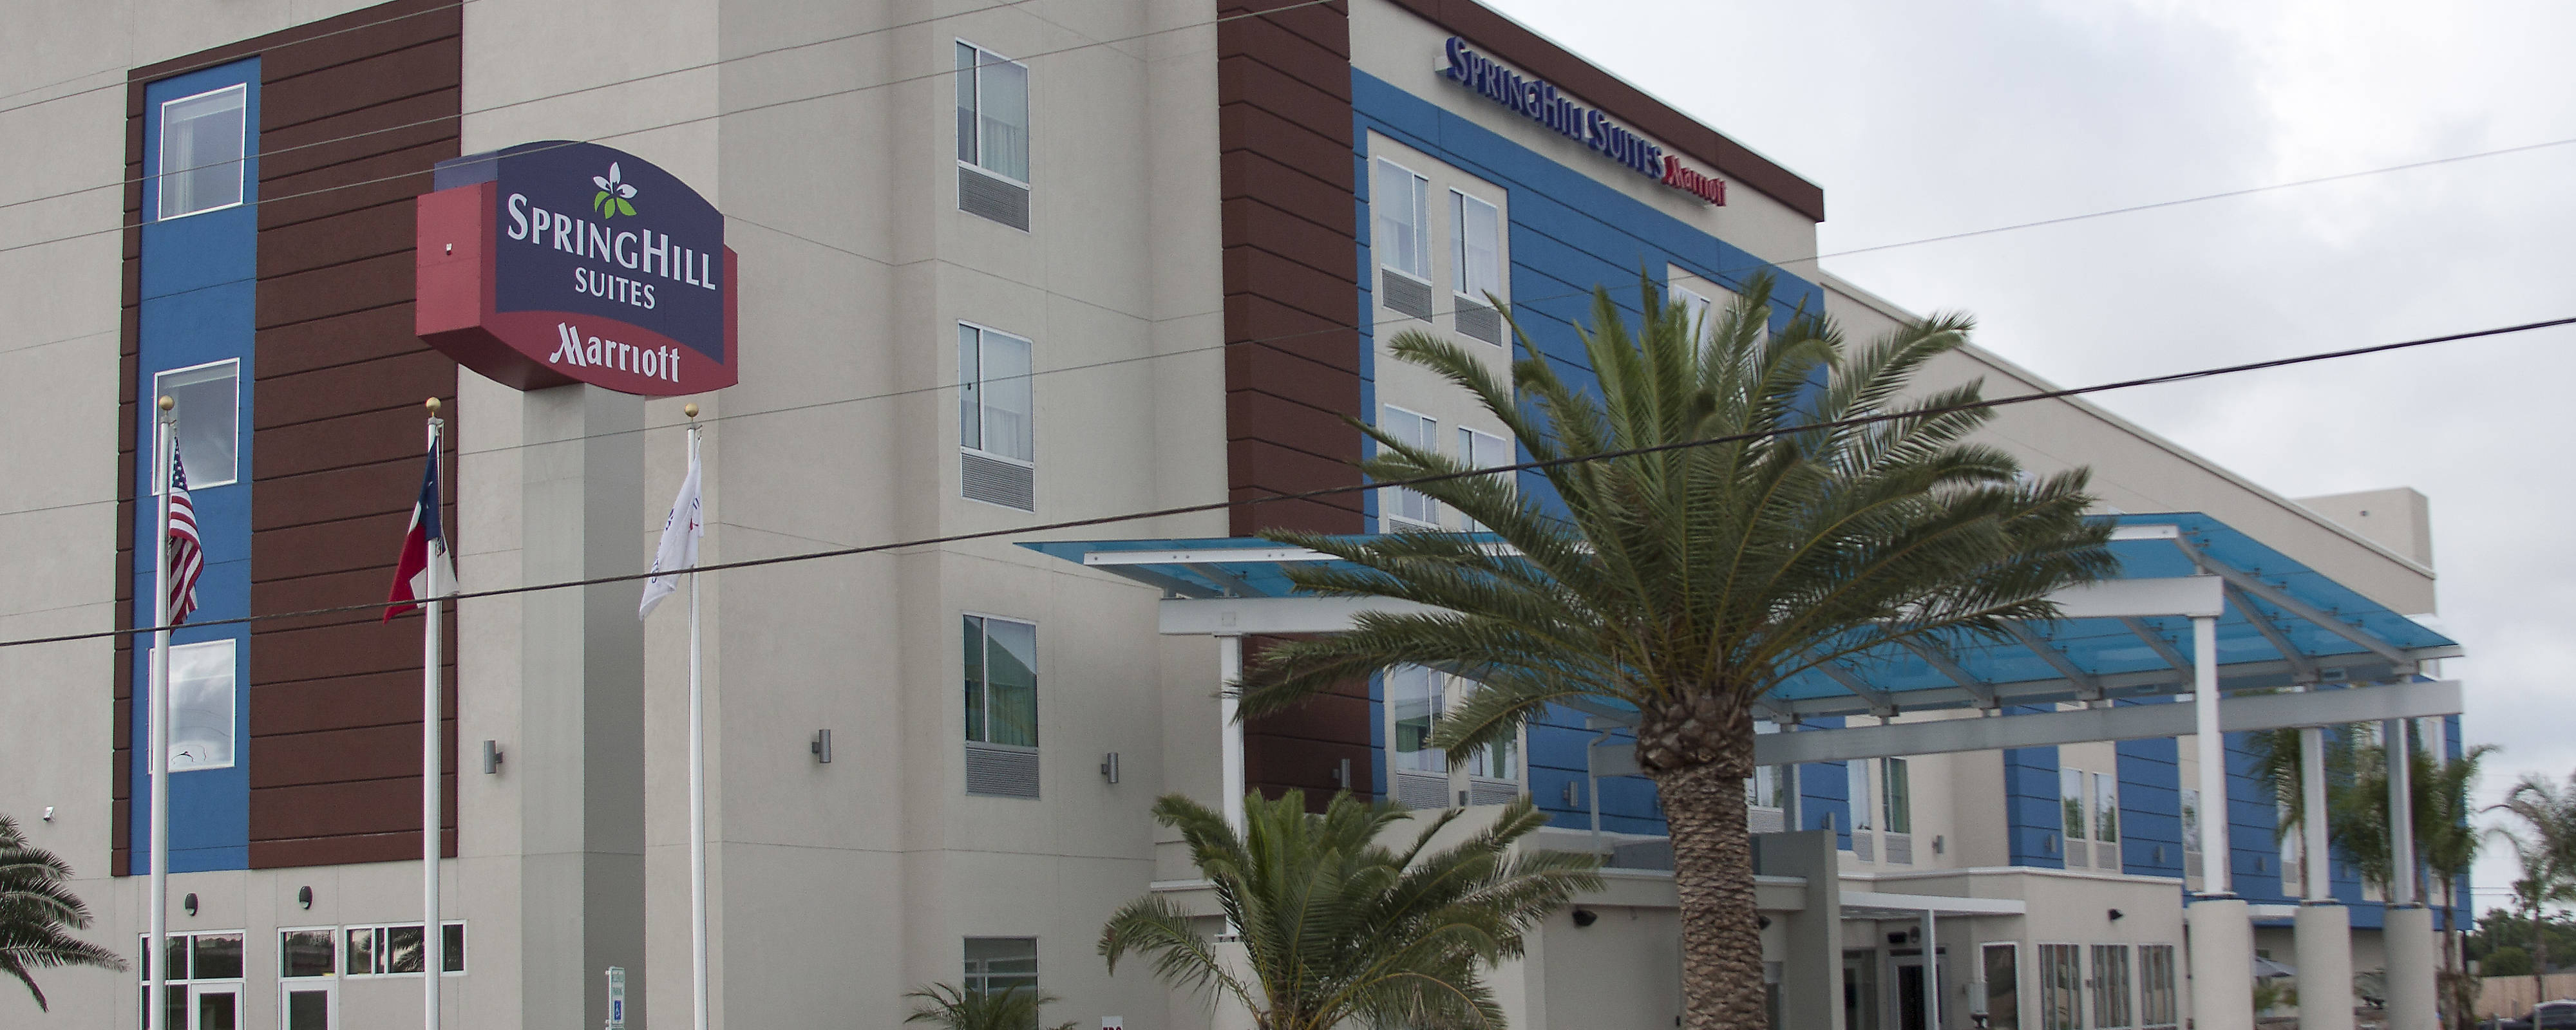 Hotels In South Corpus Christi | Springhill Suites Corpus Christi - Map Of Hotels In Corpus Christi Texas